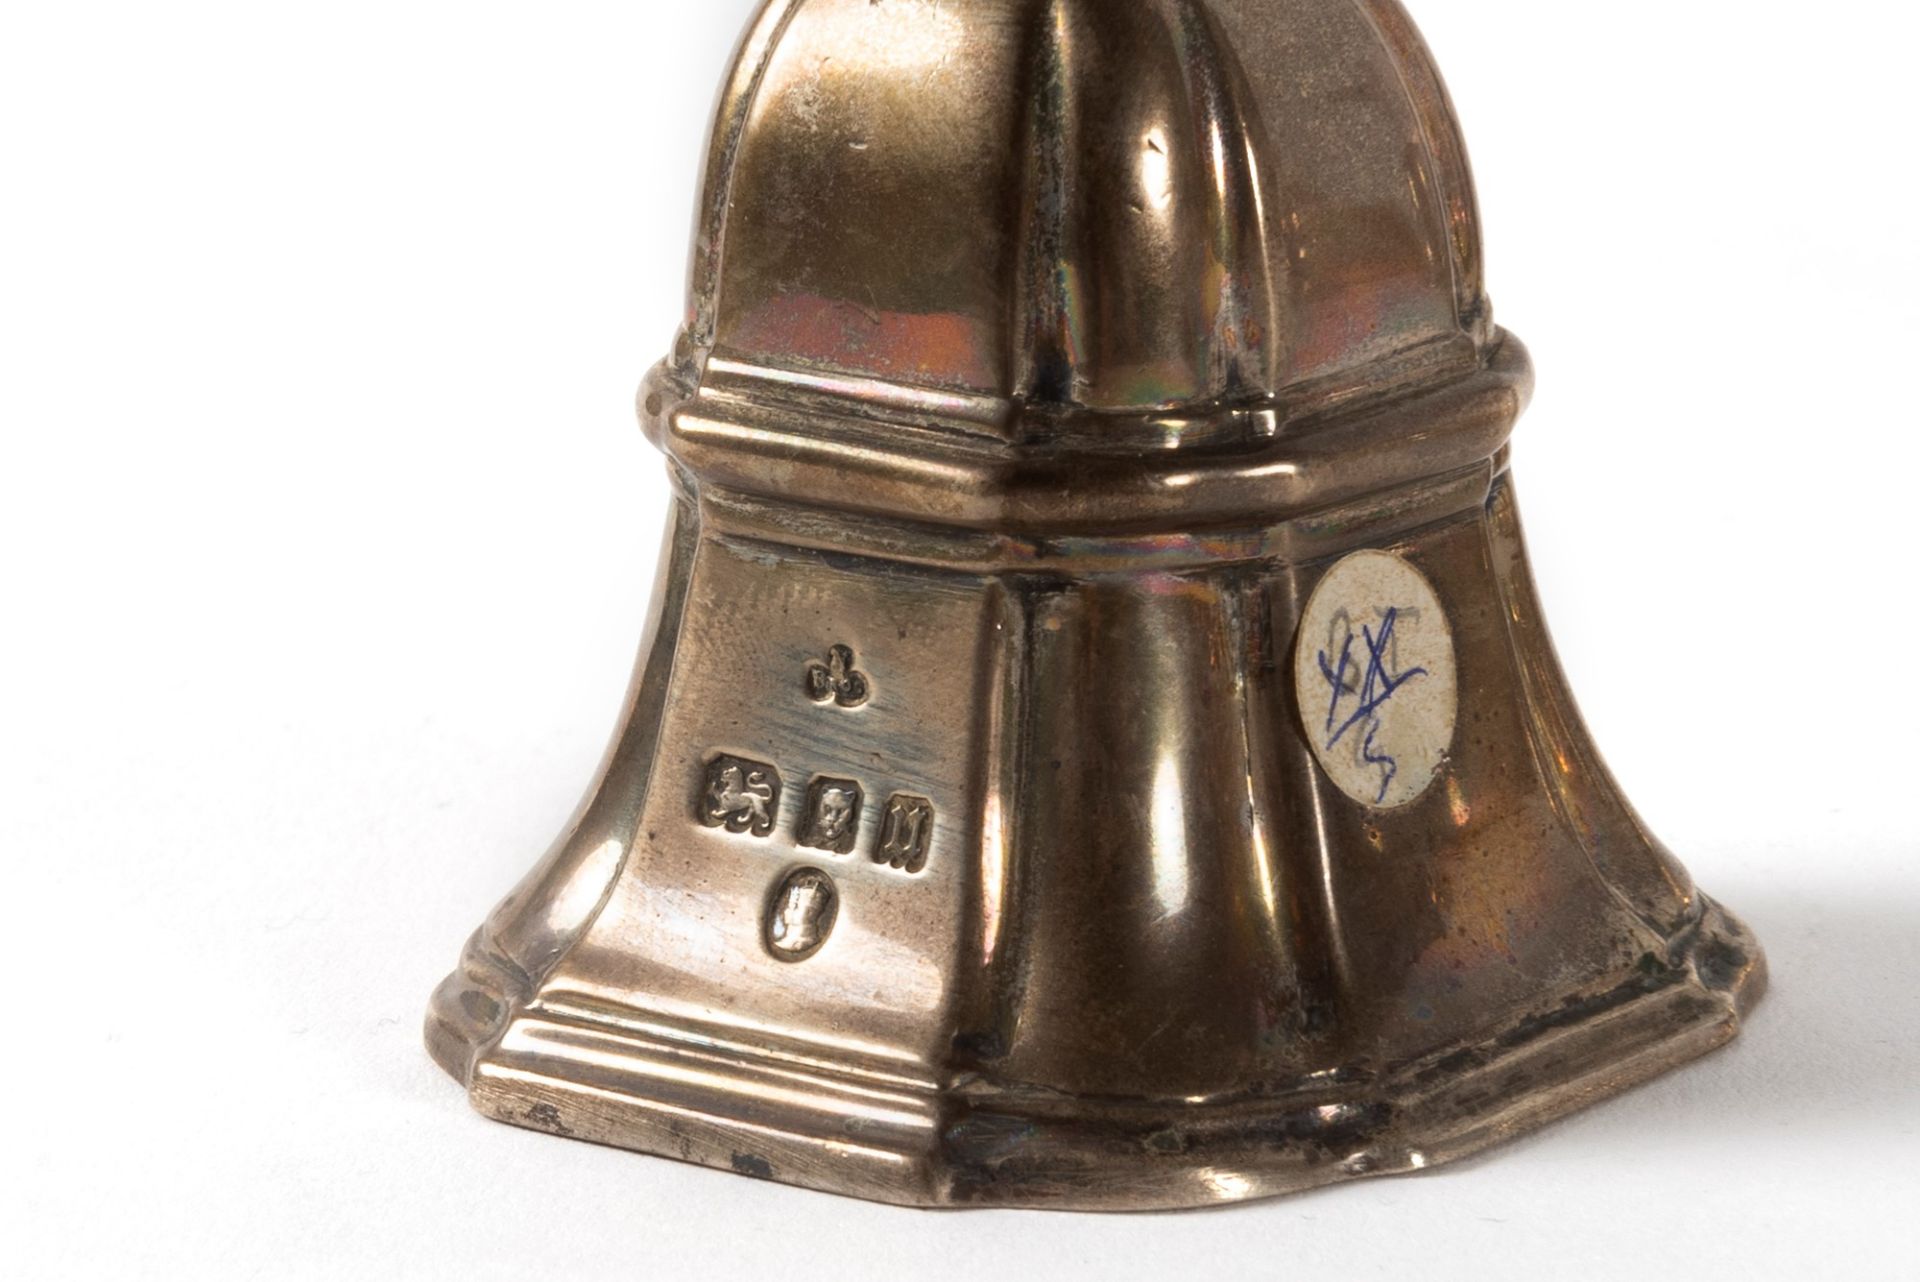 Lot consisting of five silver bells, England 19th-20th centuries - Image 2 of 2